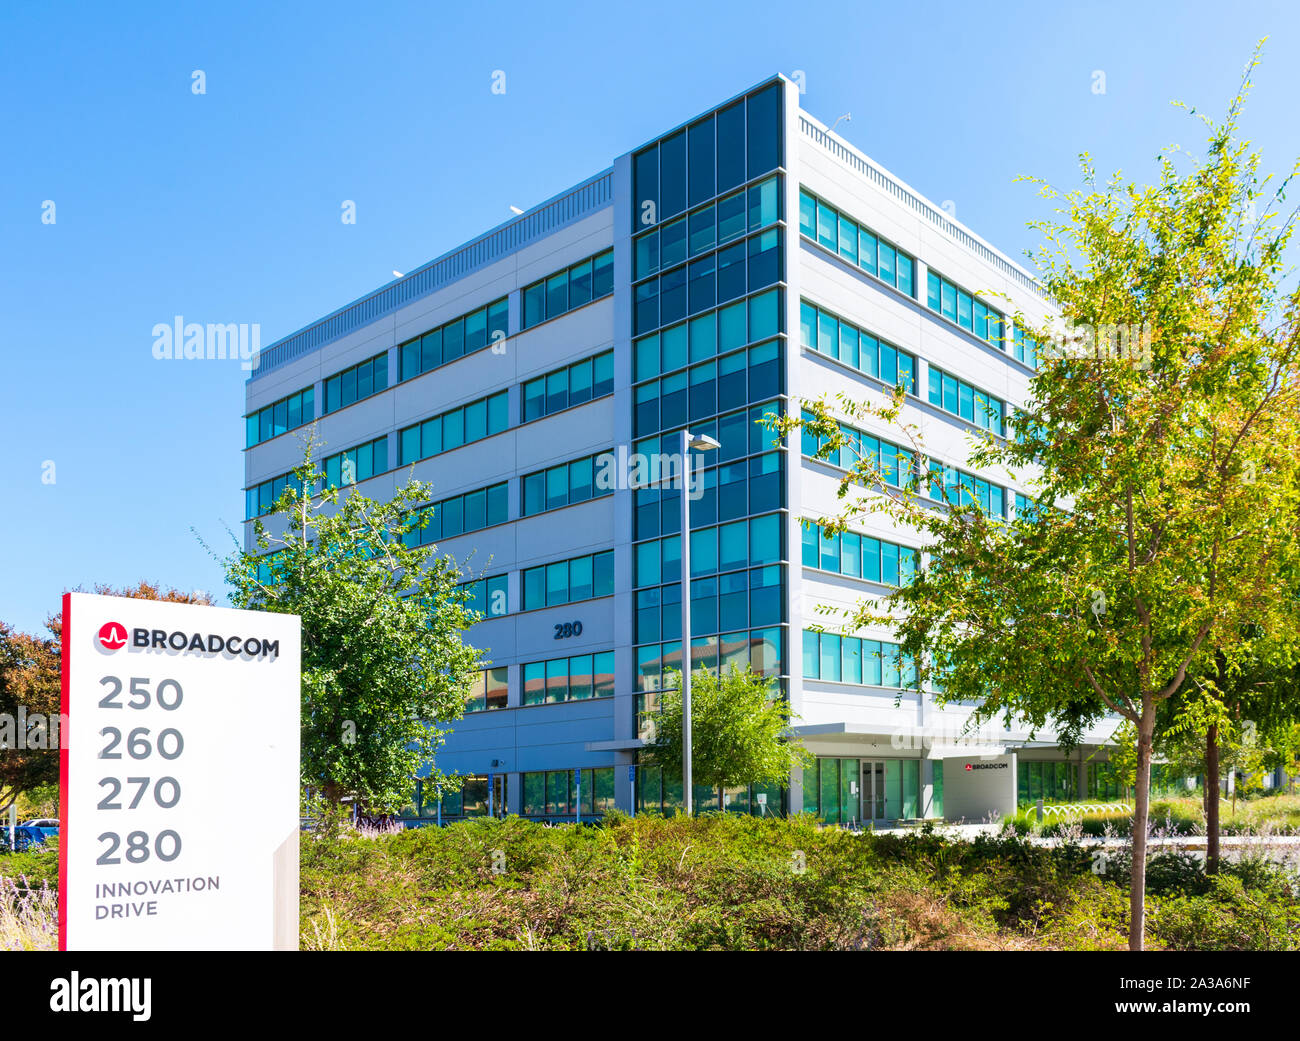 Broadcom sign at company headquarters campus in Silicon Valley, high-tech hub of San Francisco Bay Area Stock Photo